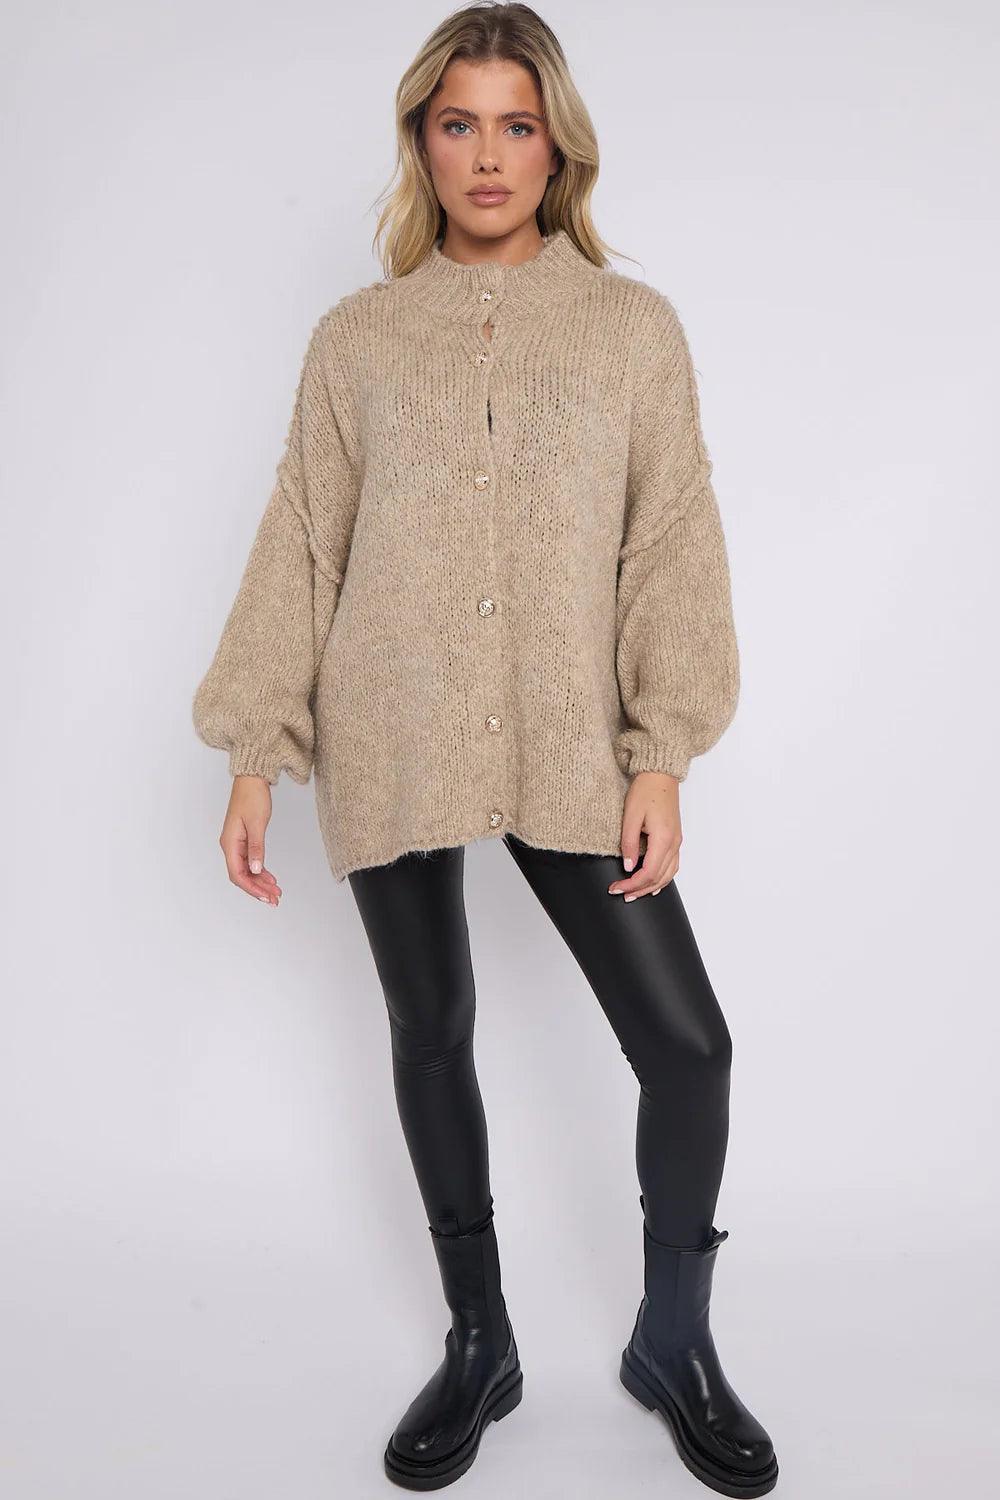 Calista Button Detail Bubble Sleeve Women Jumper UK | Mocha Color | Available in Sizes 8-16